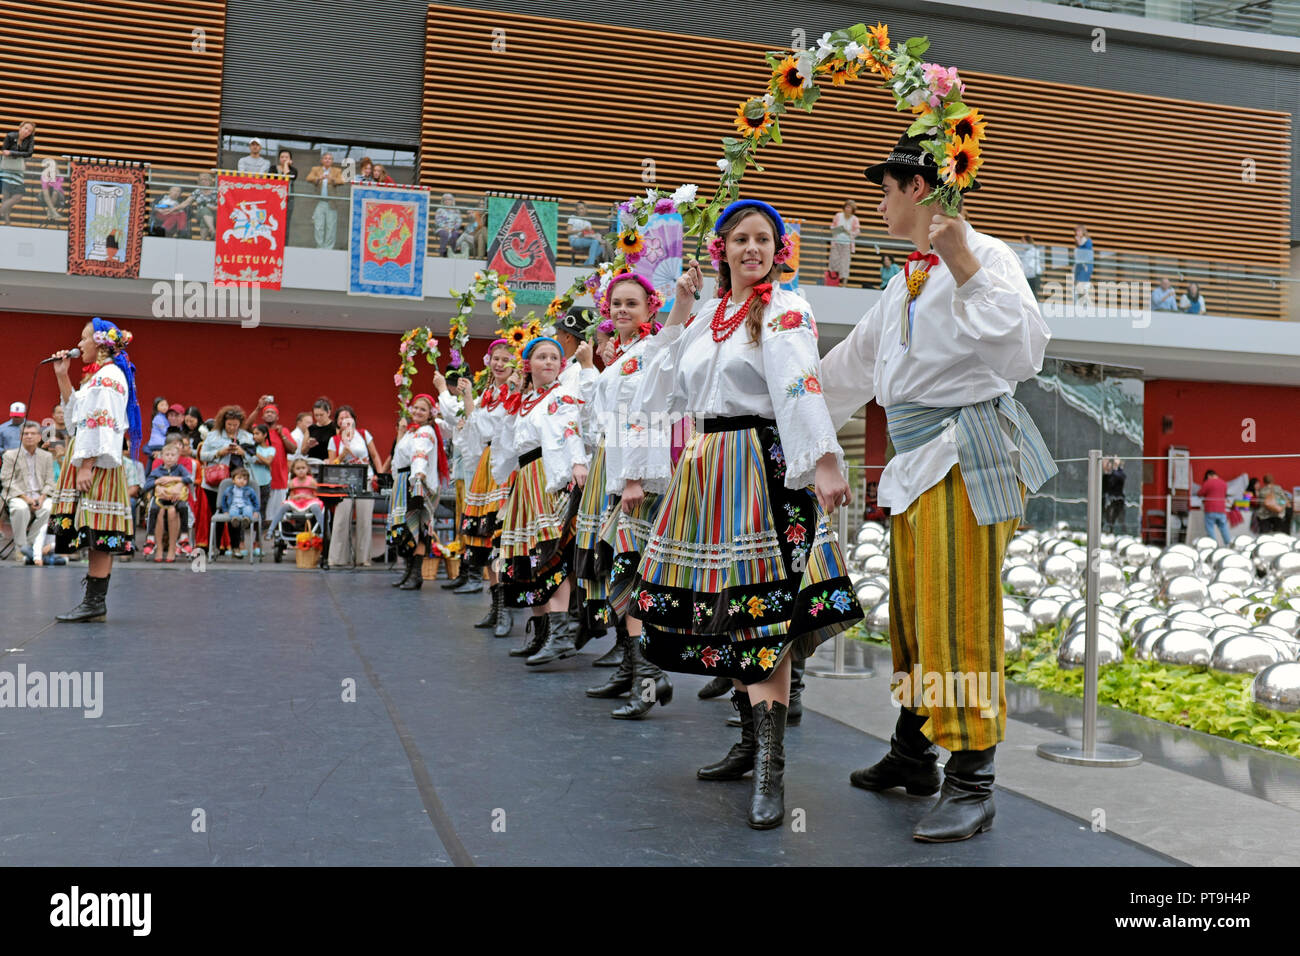 Cleveland, Ohio, USA, 7th Oct, 2018.  The Polish Folk Song and Dance Ensemble of the Polish Roman Catholic Union of America (PRCUA) perform as part of the International Cleveland Community Day festivities.  This one-day event showcases over fifty community groups in Cleveland including performances by groups showcasing their ethnic roots spotlighting the global-local sociocultural fabric of Cleveland.  Spectators watch on from the second floor of the Ames Family Atrium in The Cleveland Museum of Art in Cleveland, Ohio, USA.  Credit: Mark Kanning/Alamy Live News. Stock Photo